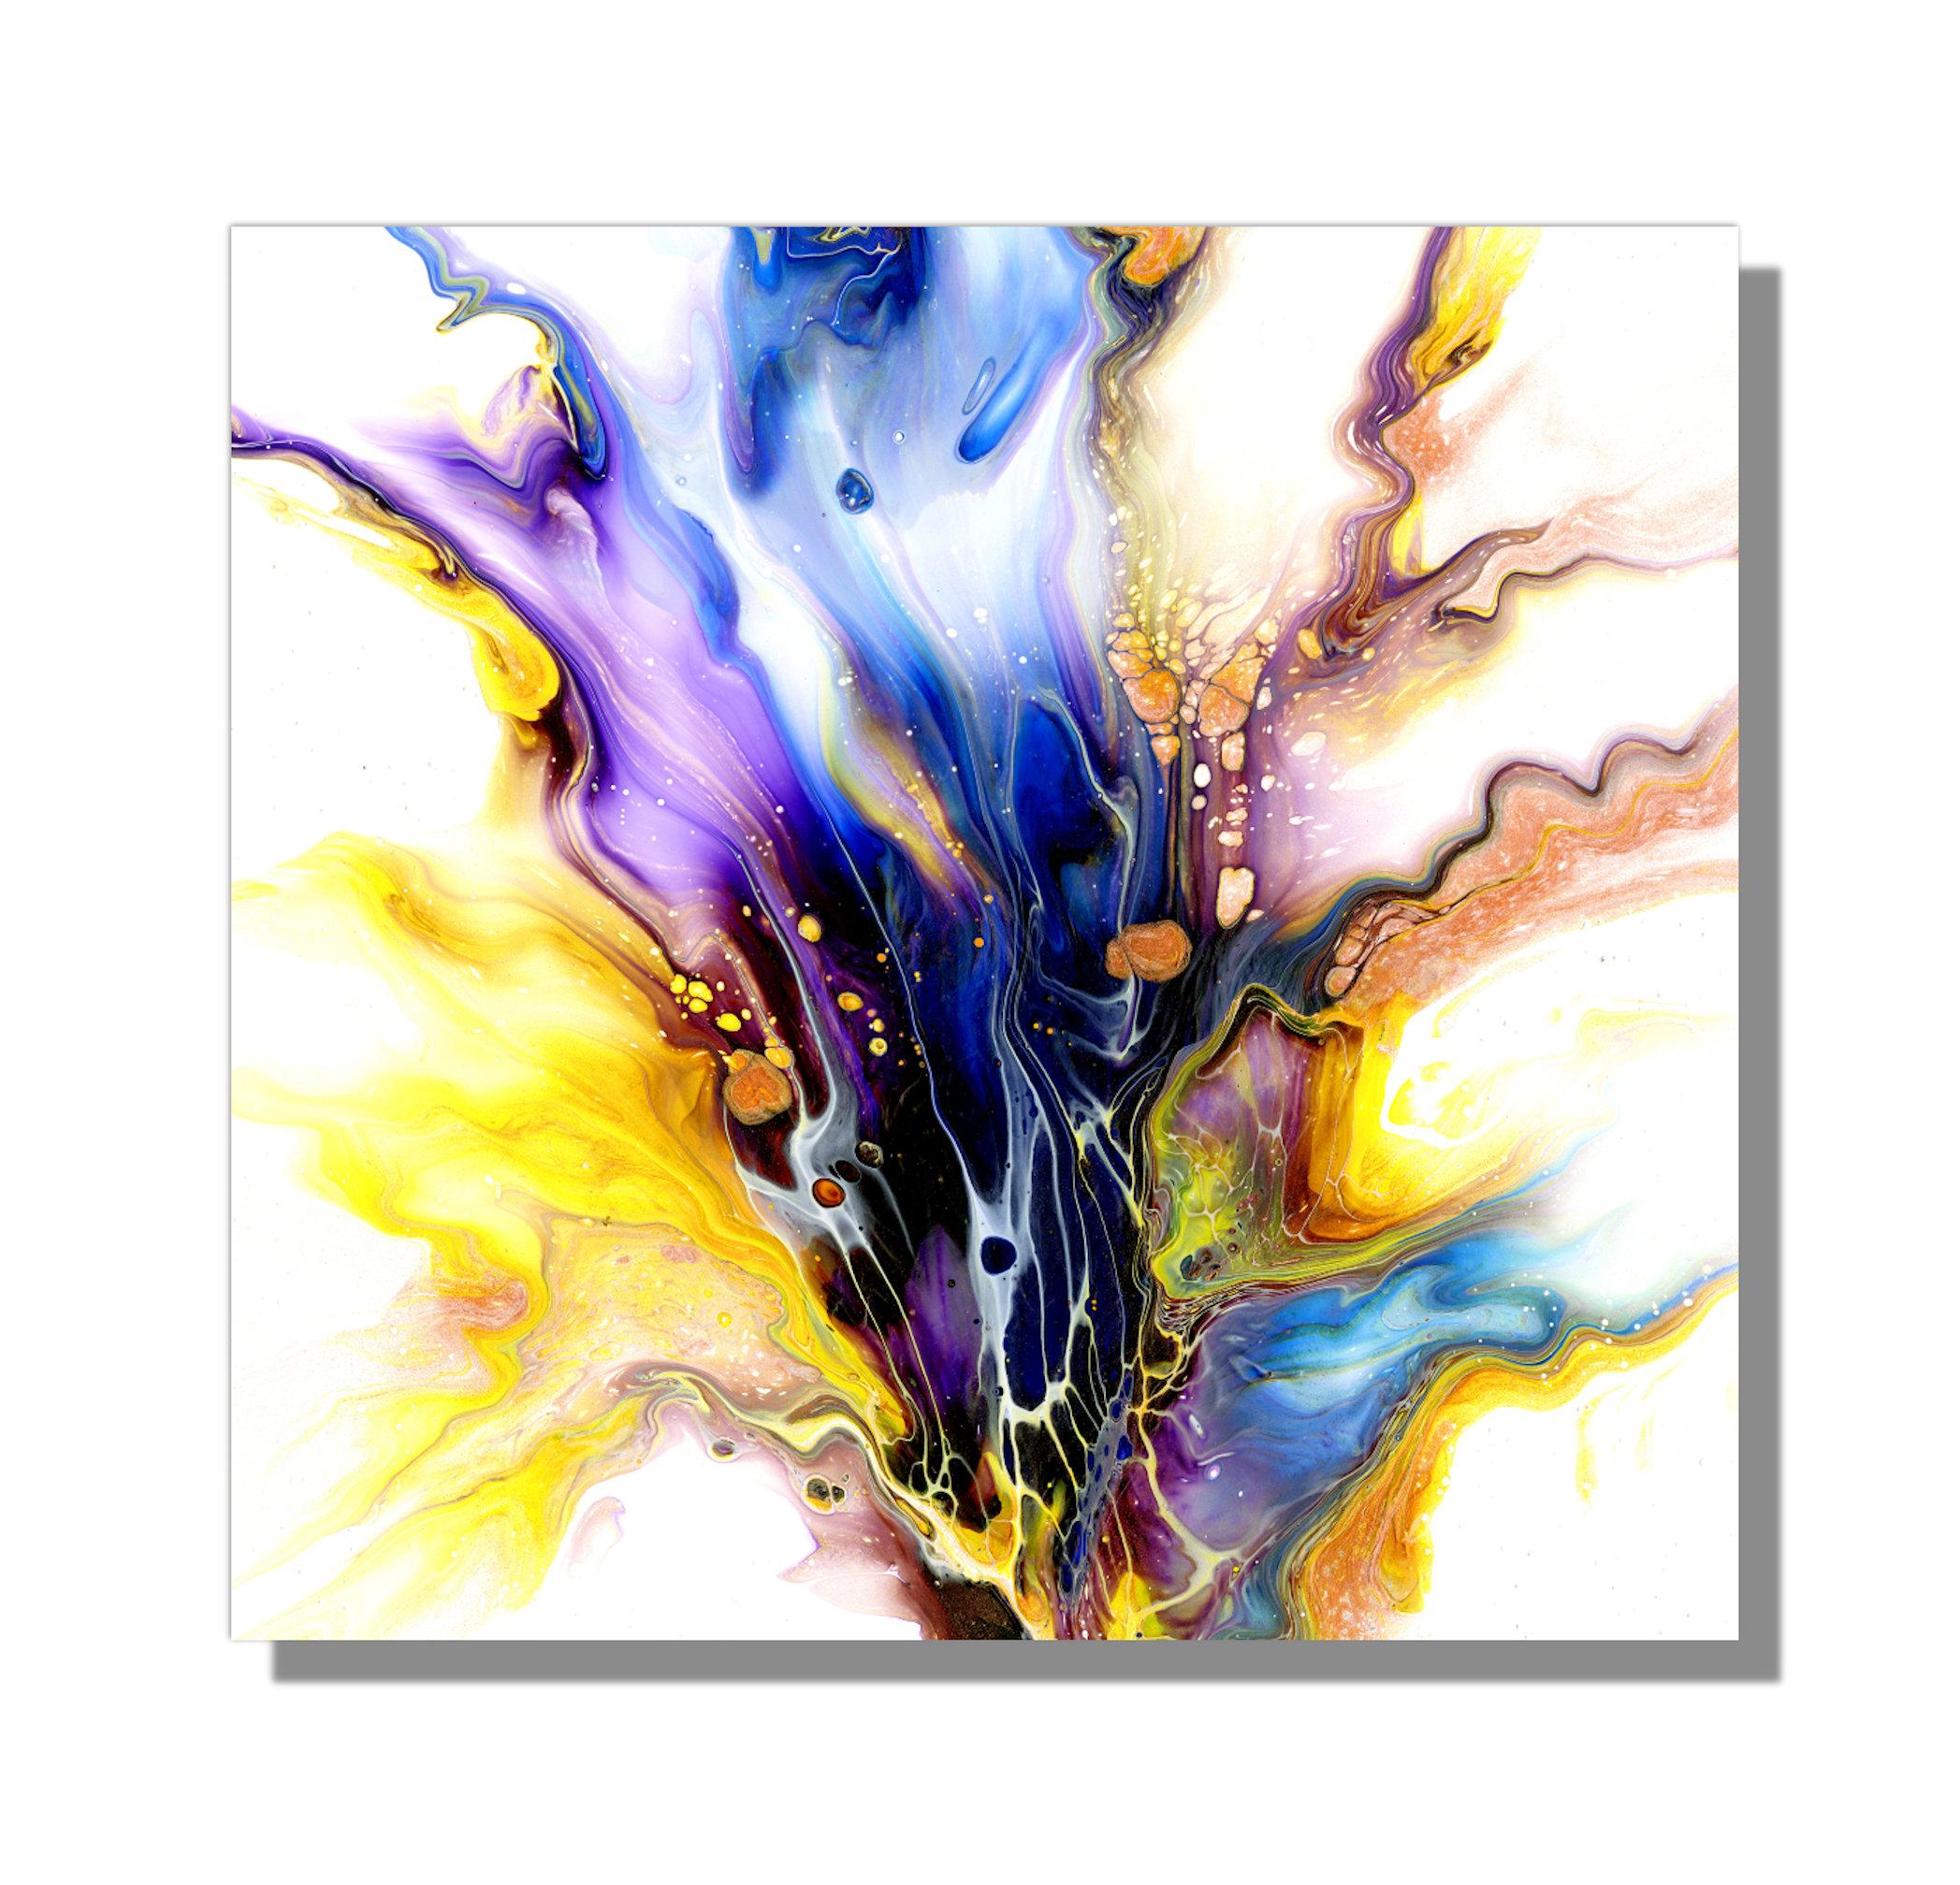 This ultra modern painting piece boasts explosive colors of yellow, blue, purple, copper, and laced with beautiful details throughout. Printed on lightweight metal composite, your artwork comes ready to hang. The automotive high-gloss clear coat